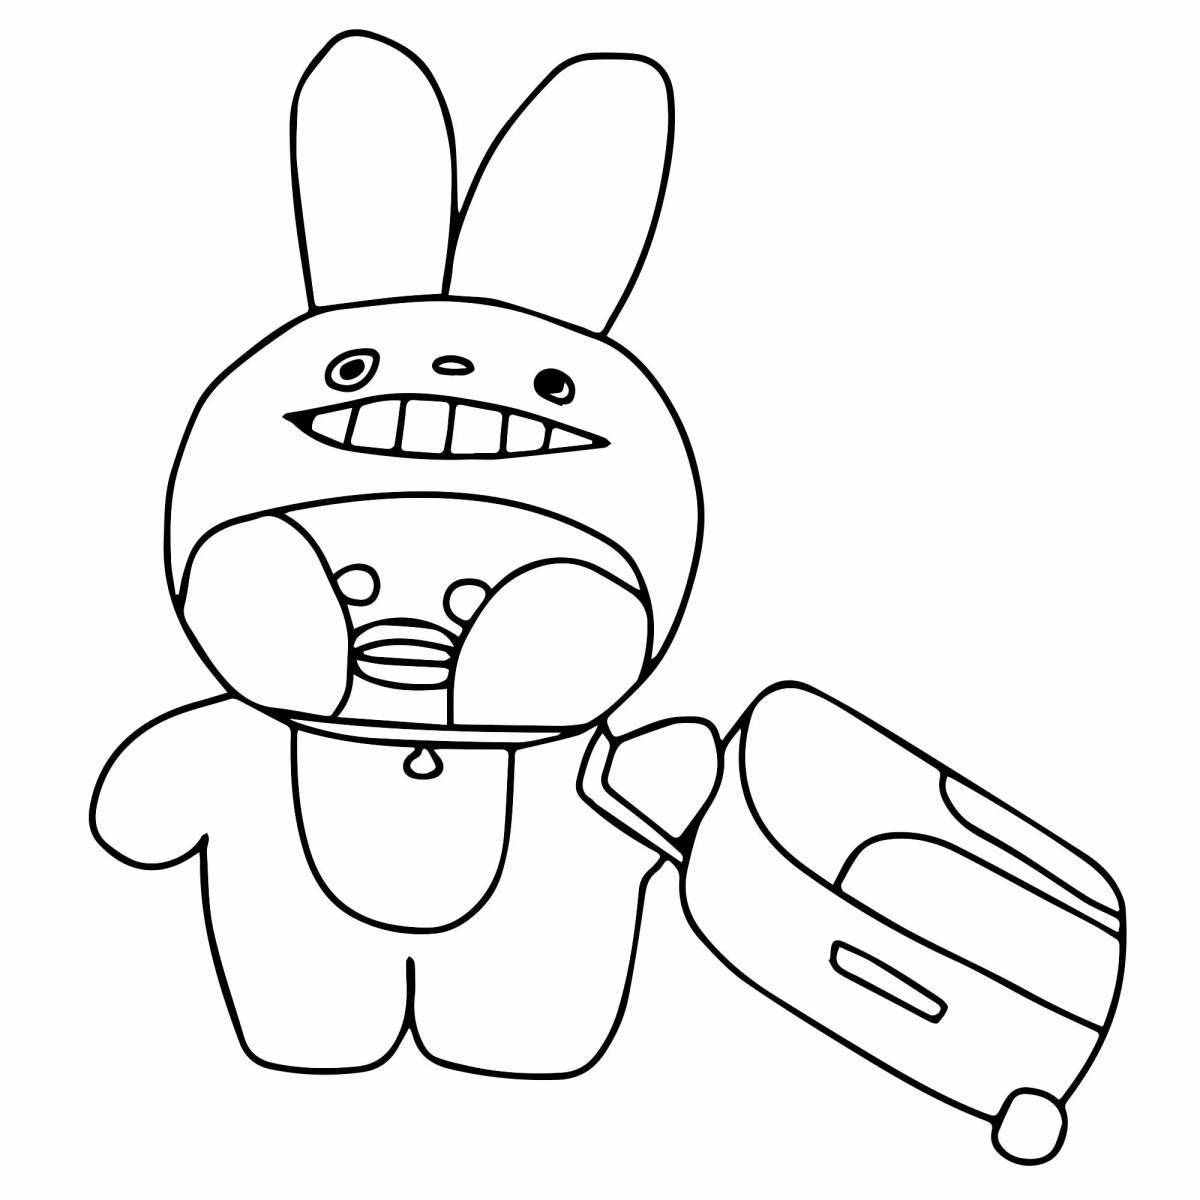 Animated lanfan duck coloring page